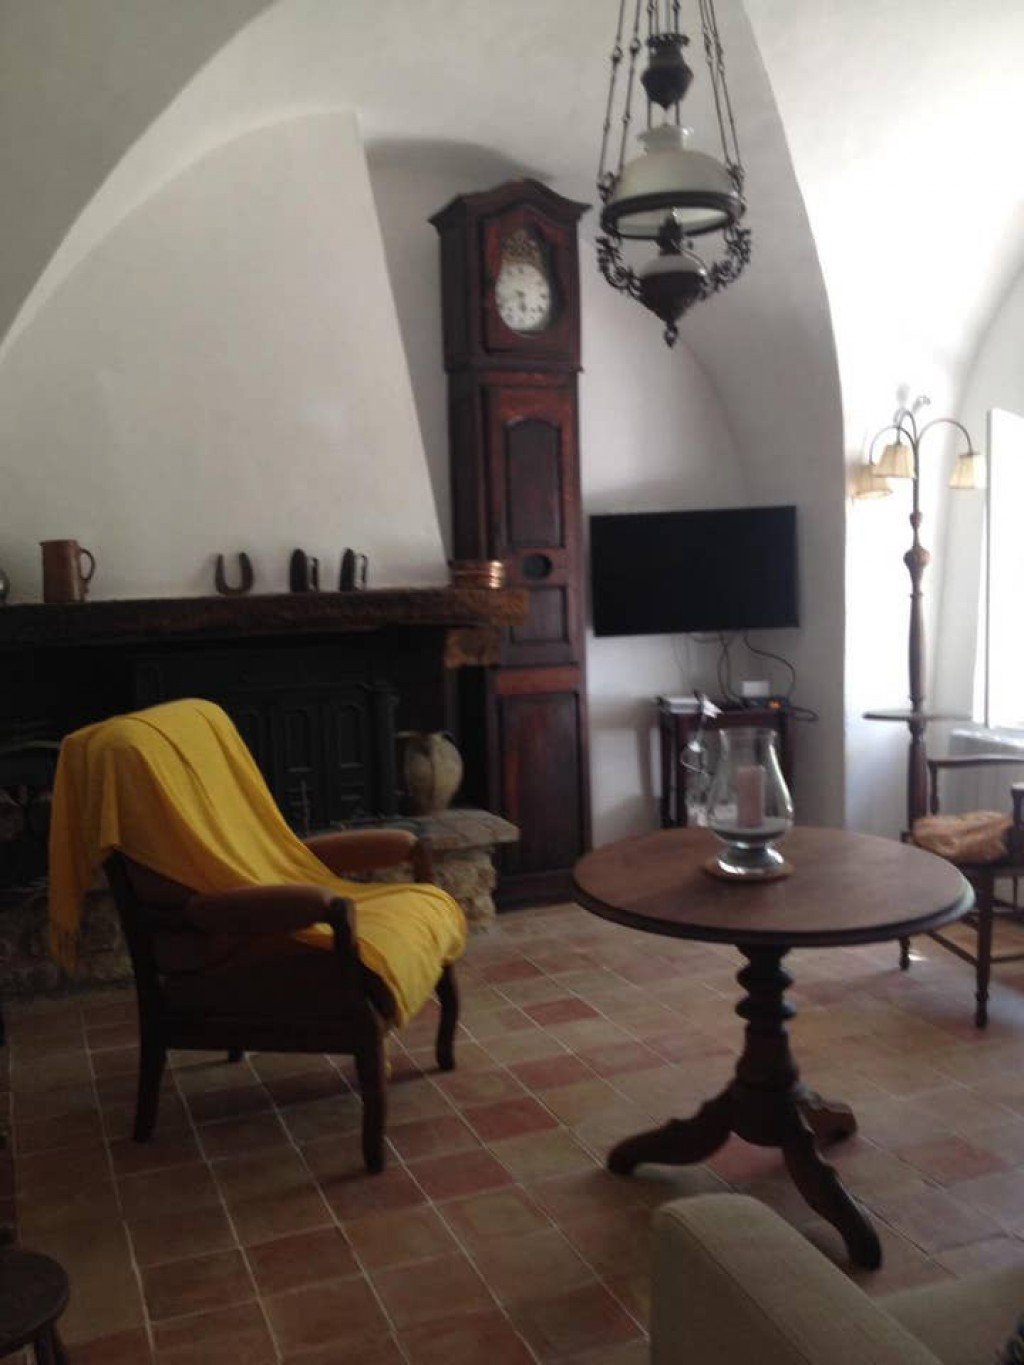 Images for Long Term Rentals in France, Lauris, Aix-en-Provence EAID: BID:homefromhome